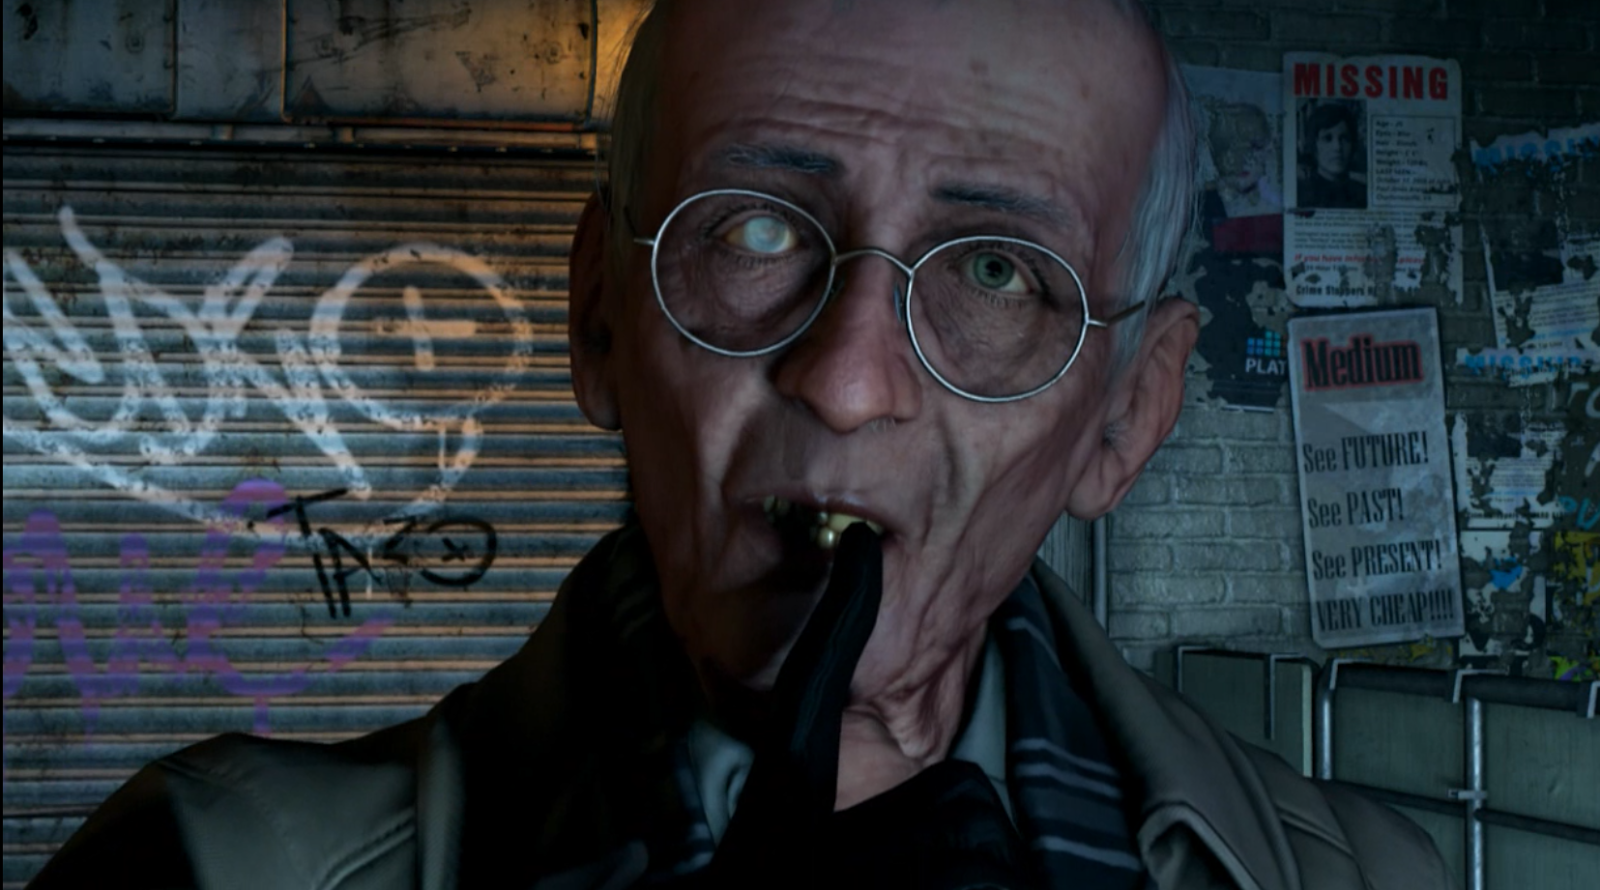 Watch Dogs will launch May 27 Ubisoft has confirmed, after the trailer ...